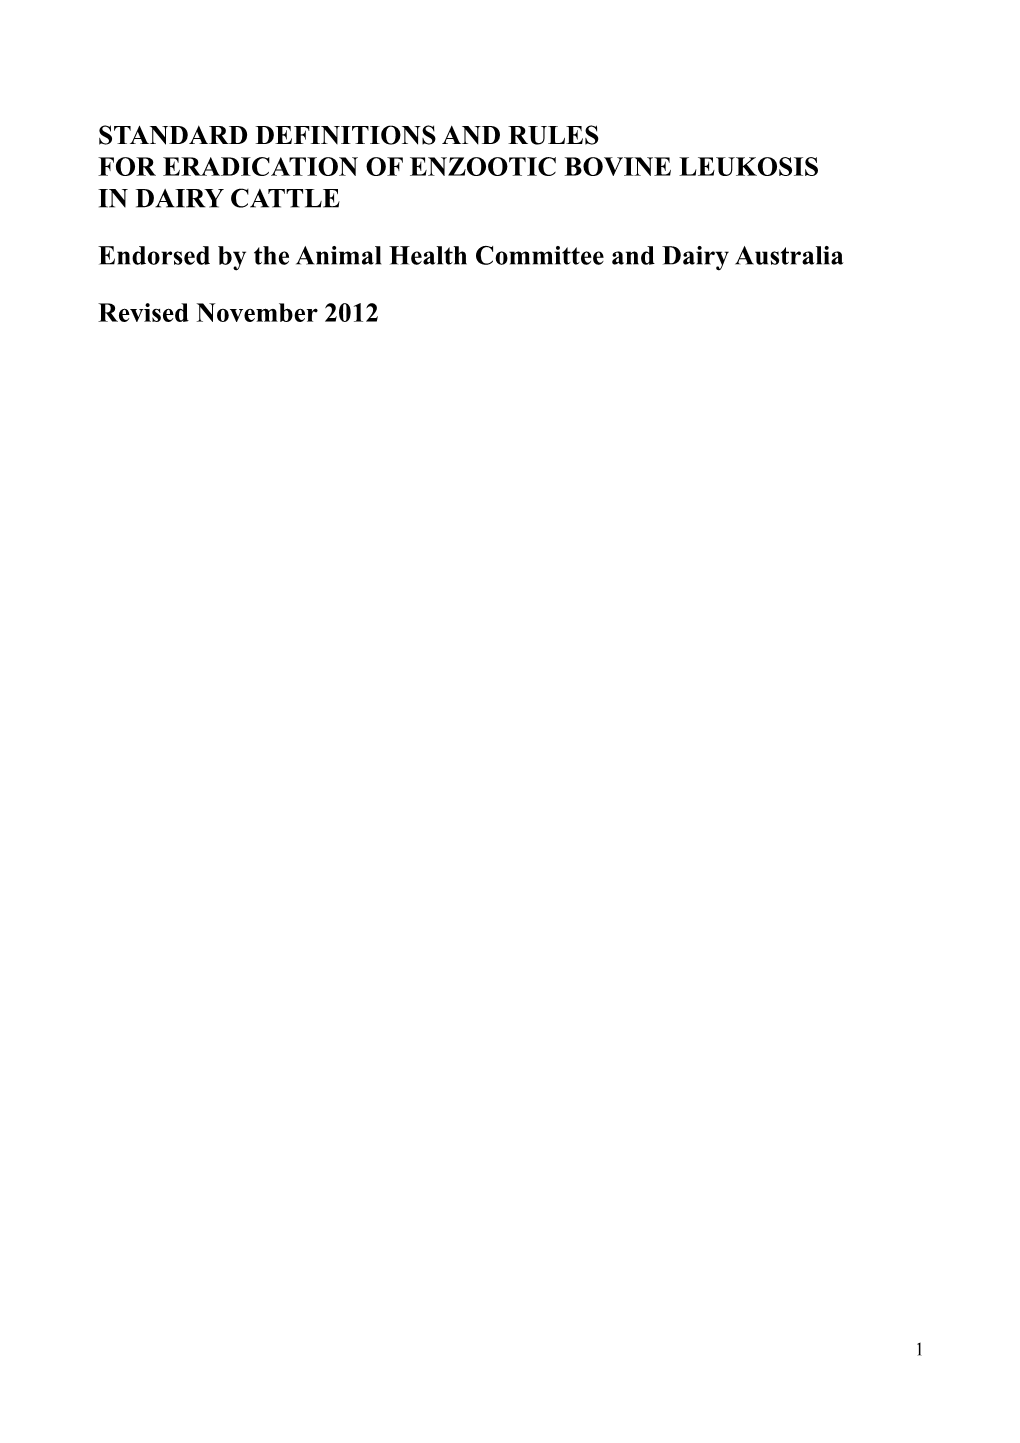 Standard Definitions and Rules for Eradication of Enzootic Bovine Leukosis in Dairy Cattle